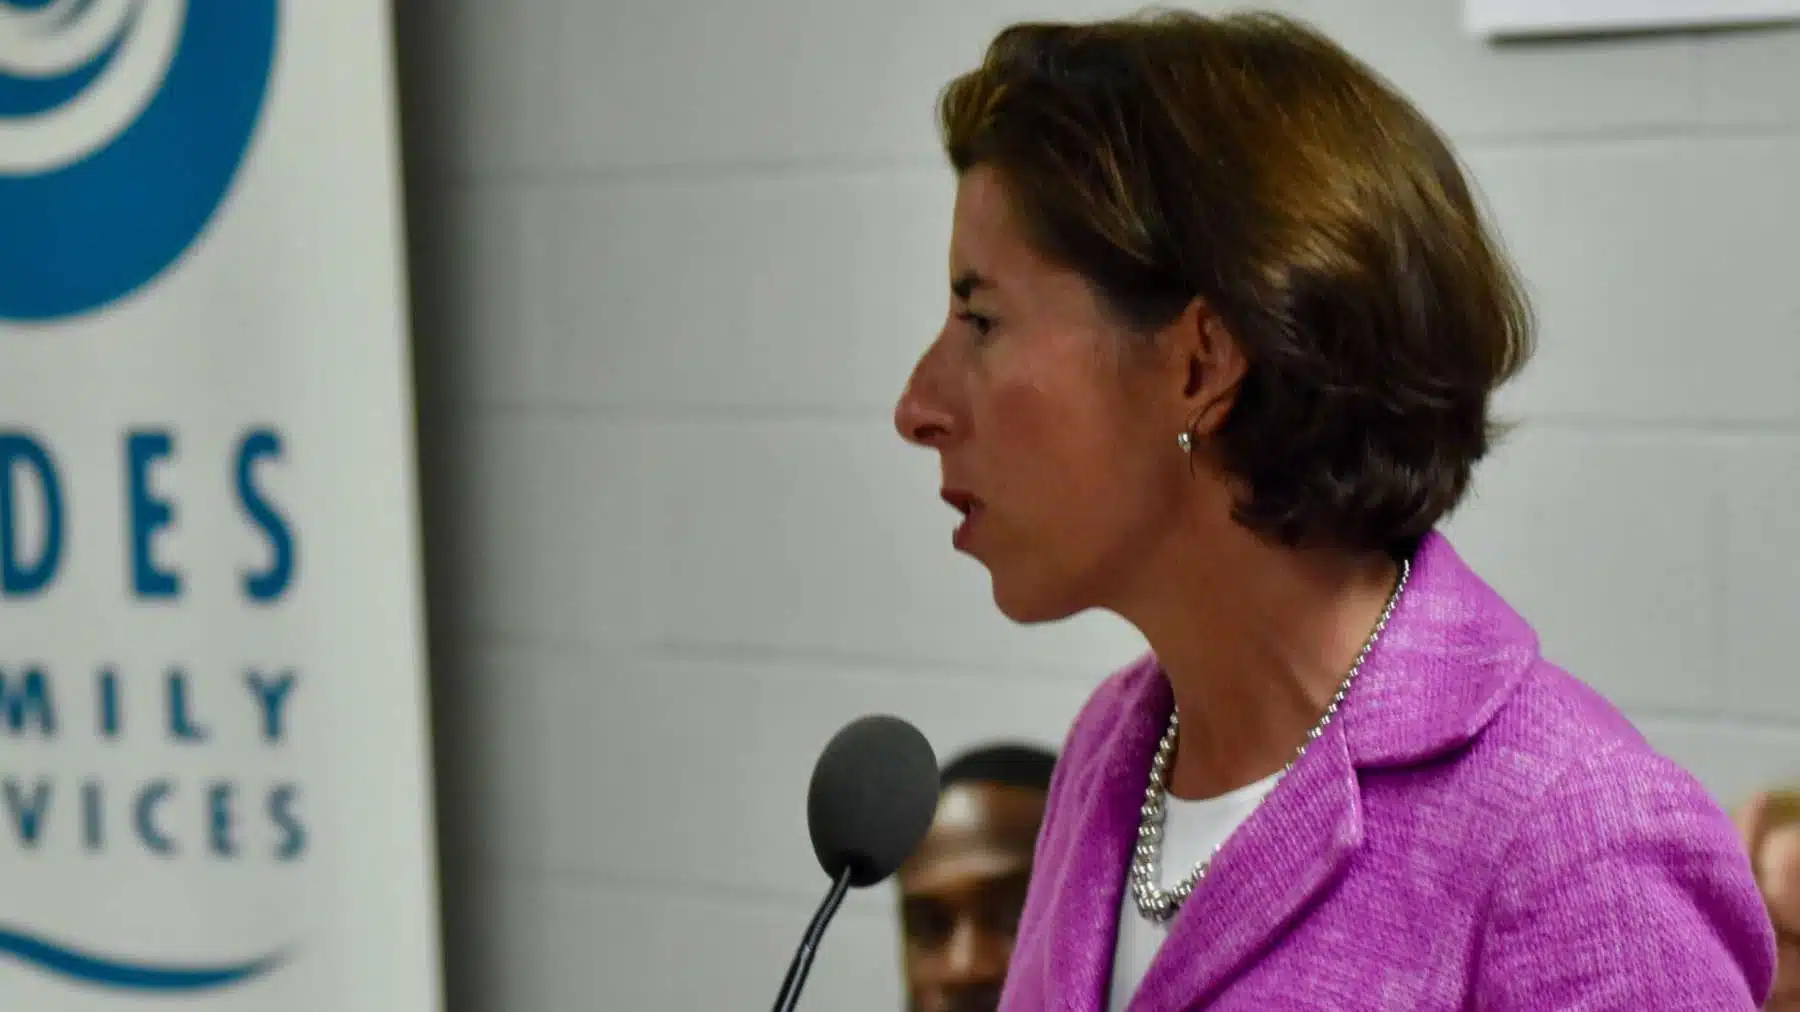 Rhode Island News: Governor Gina Raimondo commits to including a non-binary marker on drivers licenses and birth certificates within the next year